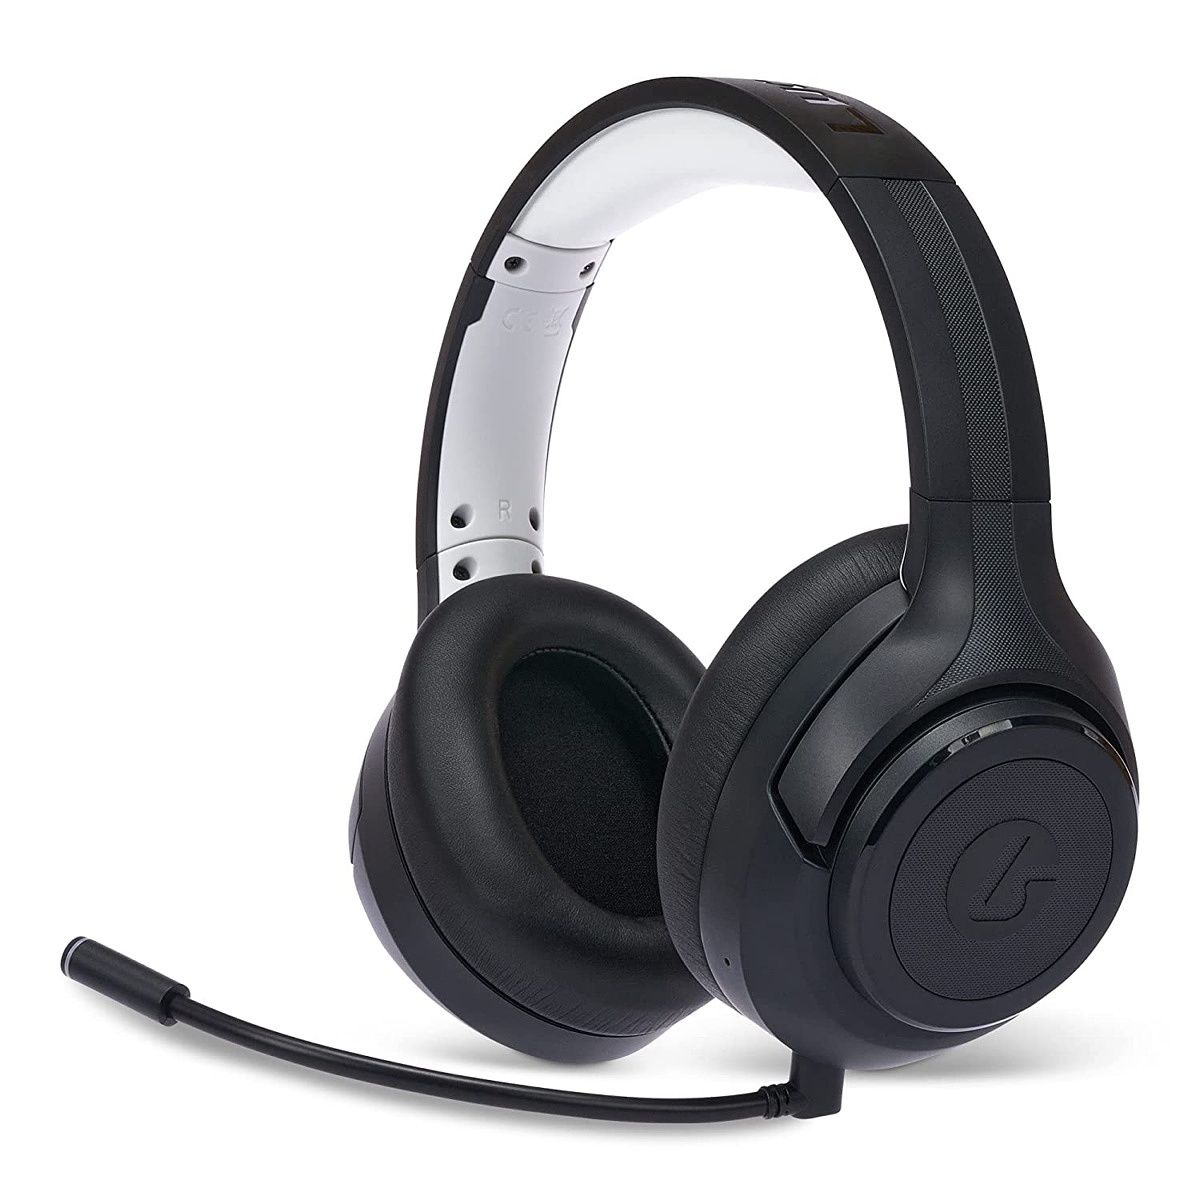 A new, attractively priced wireless gaming headset for Xbox and PC that packs insanely good battery life.